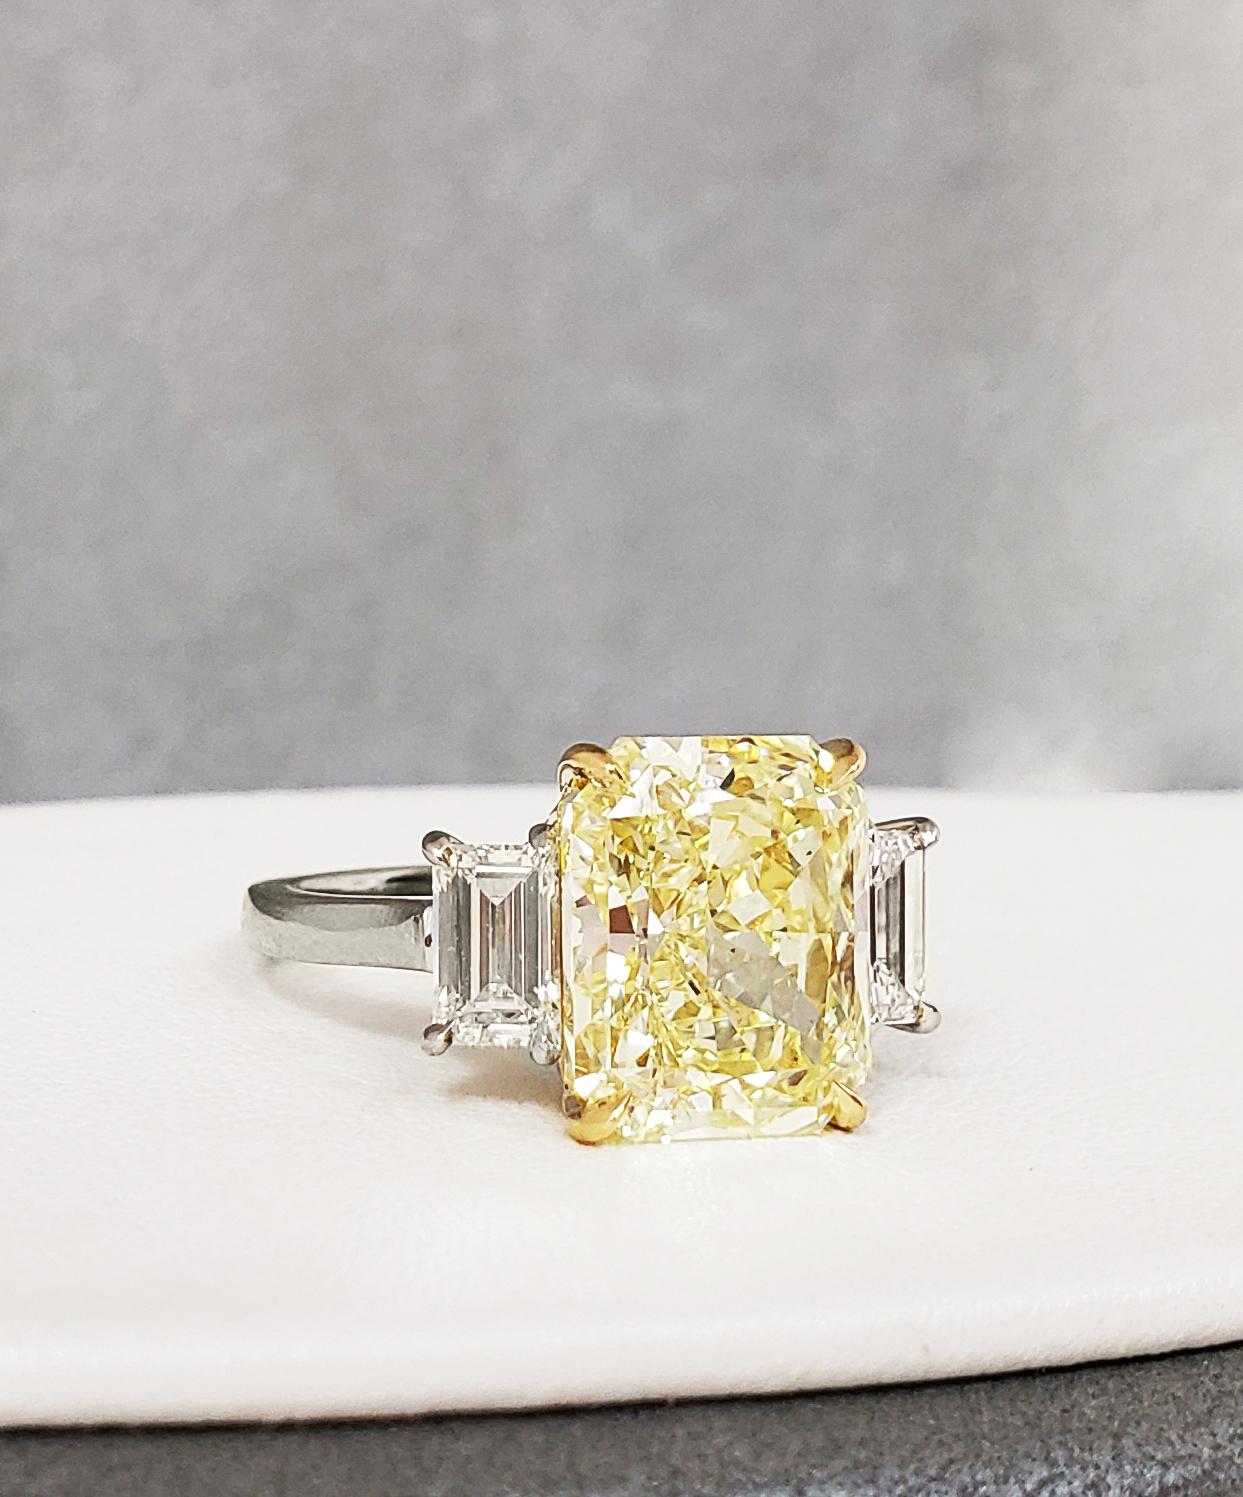 The clarity in this center Fancy Yellow radiant diamond is VS2 it is flanked by a pair of matching emerald cut white diamonds 1.10 total carat weight for a modern and tailored look. The center stone is certified by GIA #220513527 (see picture for